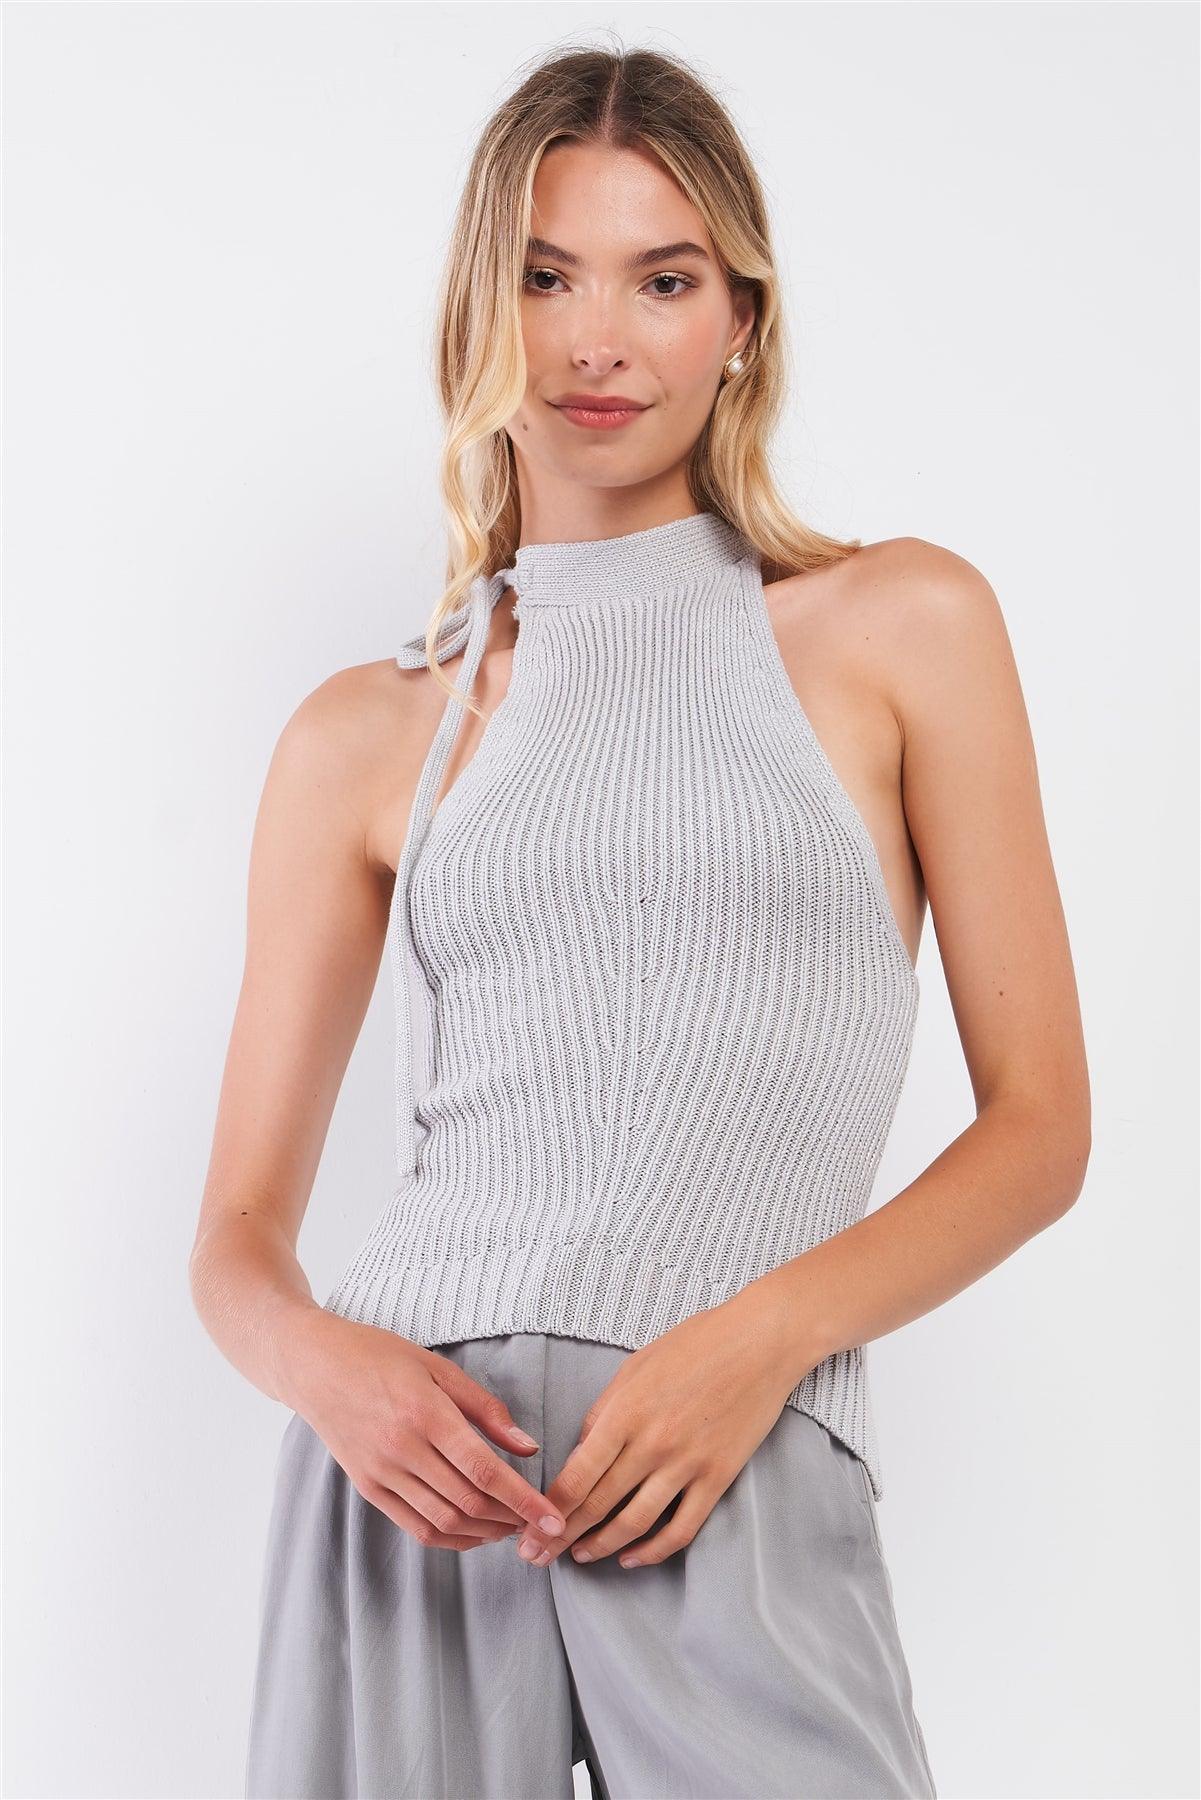 Silver Grey High Neck With Self-Tie Detail On The Side Sleeveless Ribbed Knit Top